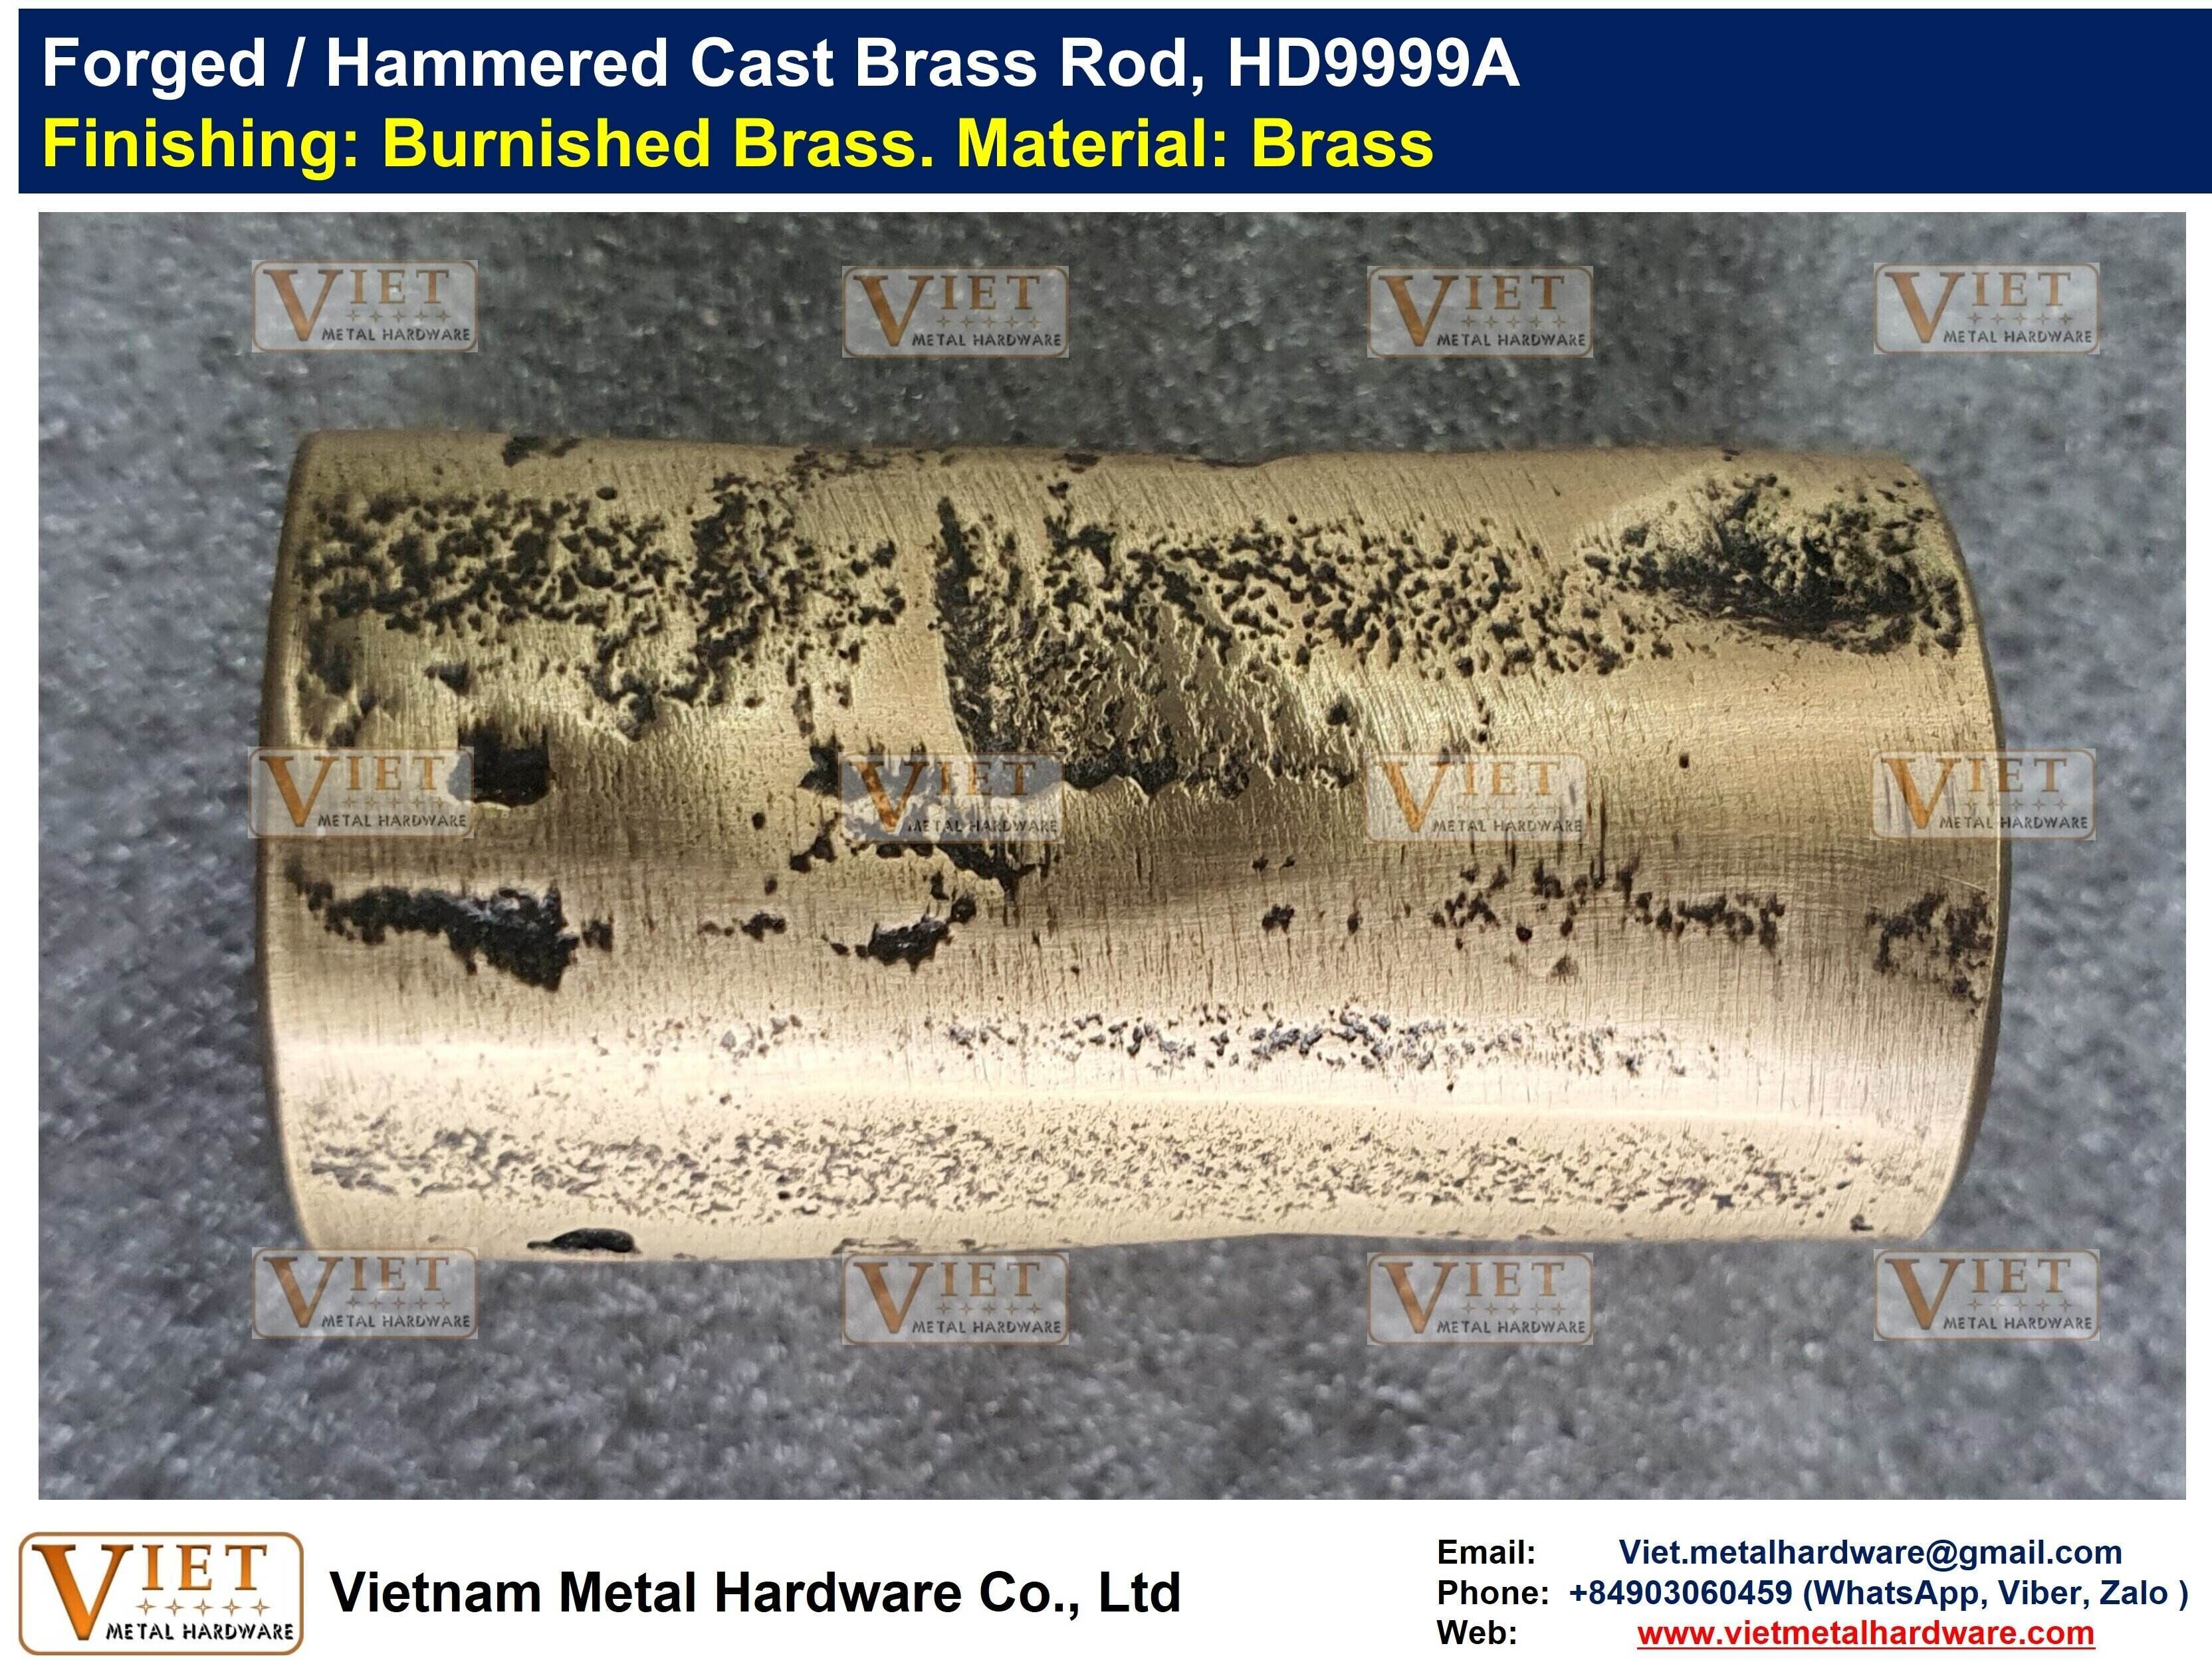 Forged / Hammered Casted Brass Rod, HD9999A. Burnished Brass - VIETNAM  METAL HARDWARE CO., LTD